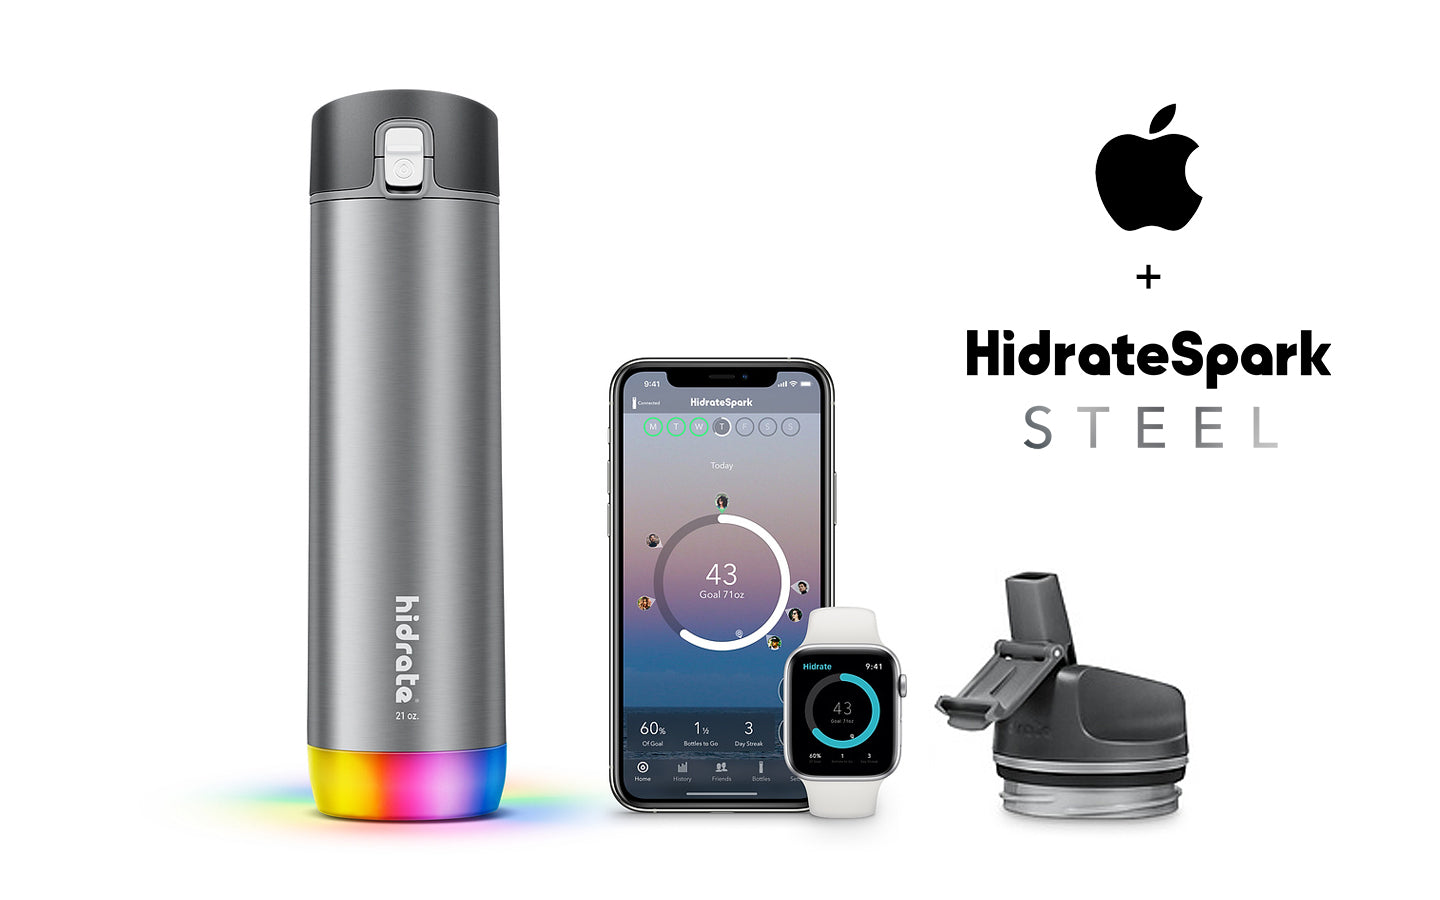 Available Exclusively at Apple.com: HidrateSpark STEEL Bundle